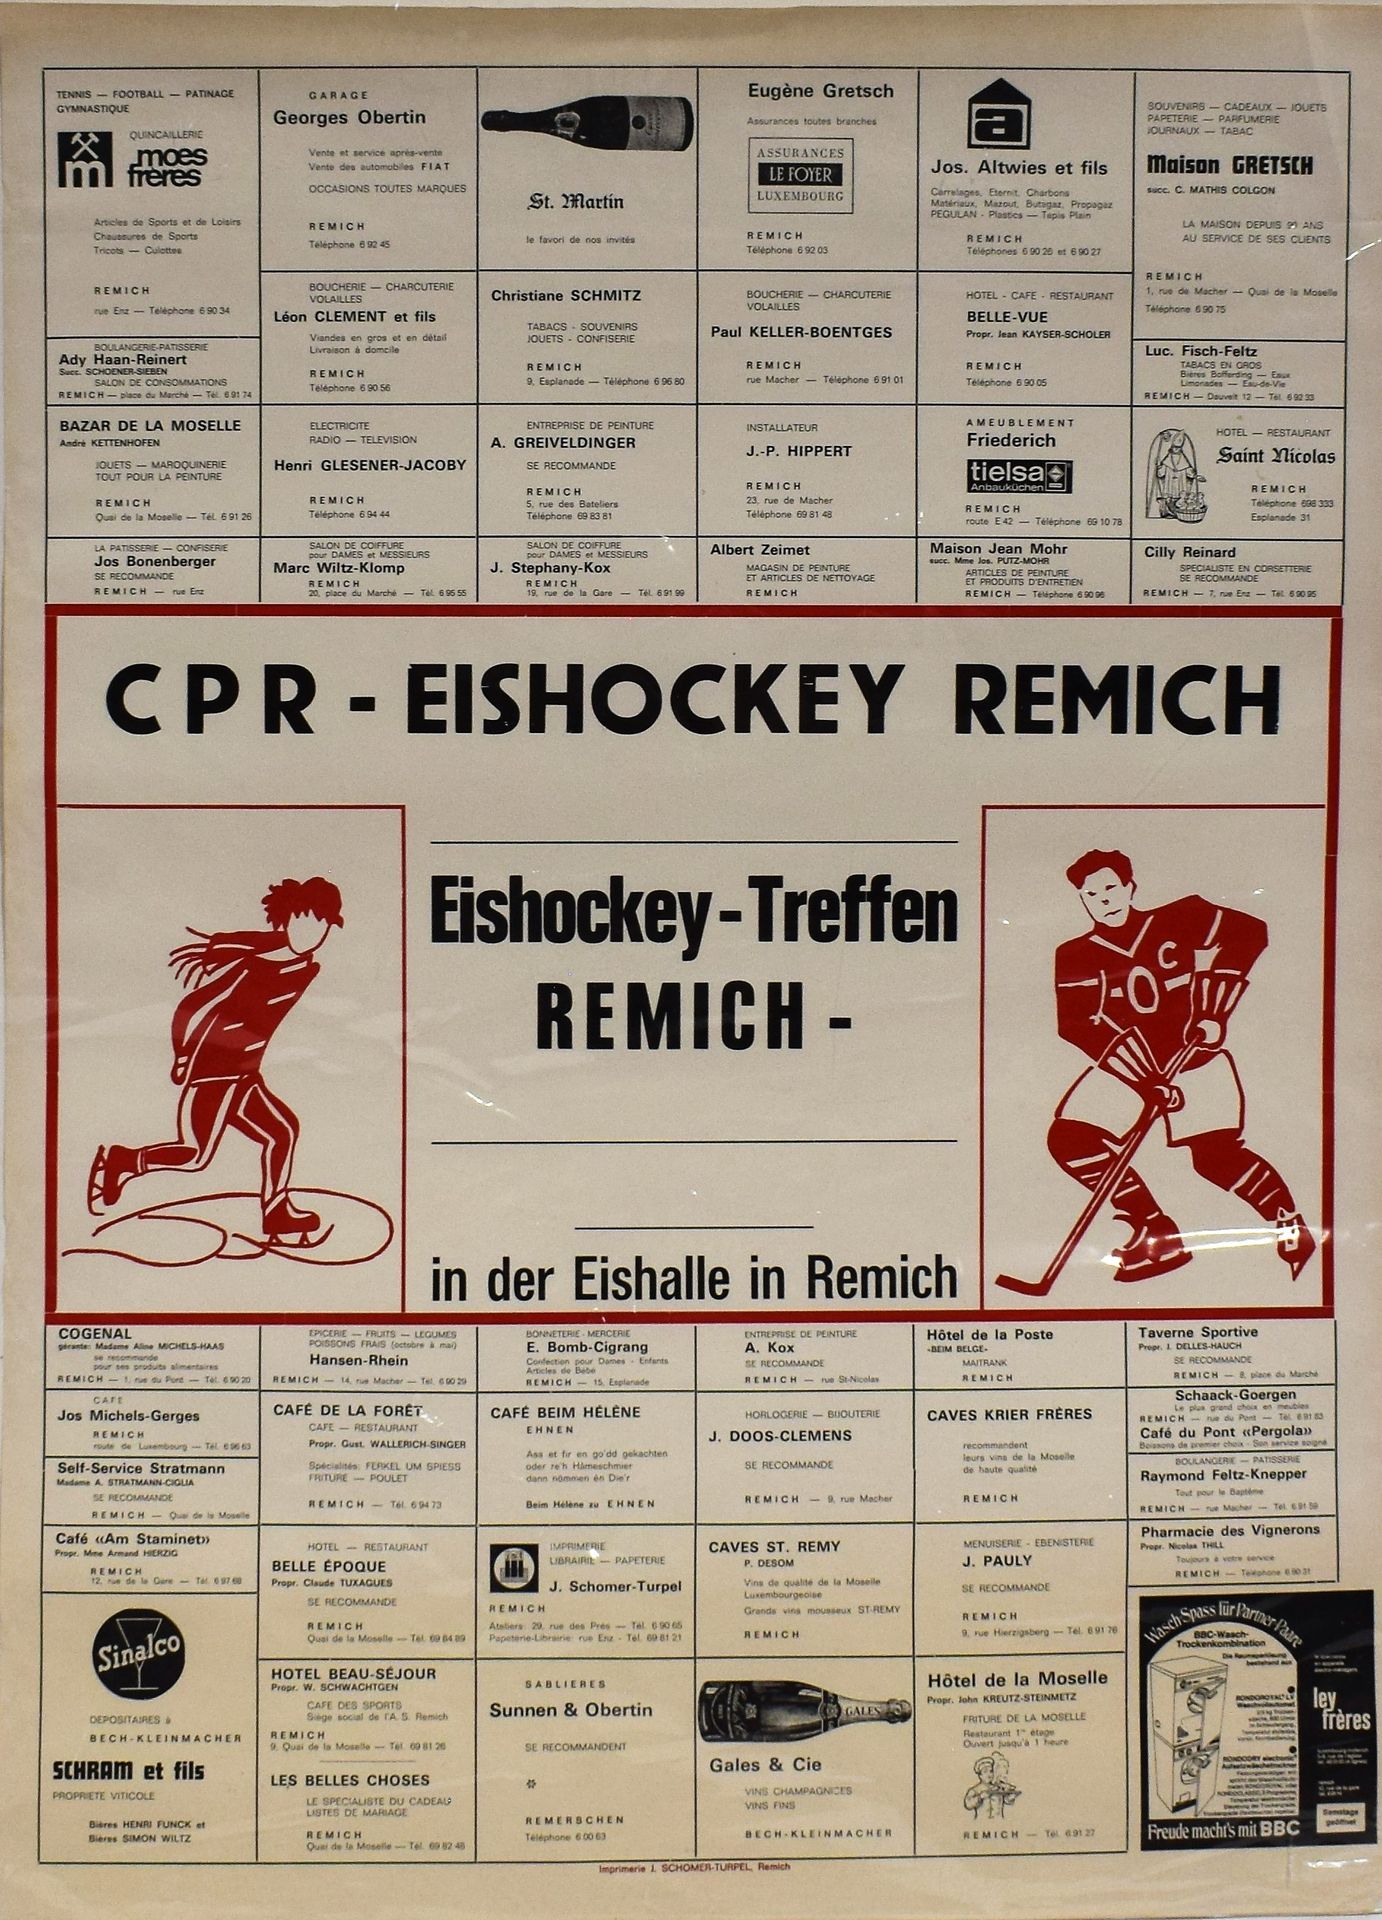 Null (AFFICHE/SPORT) Blank poster announcing the EISHOCKEY matches of the "CPR R&hellip;